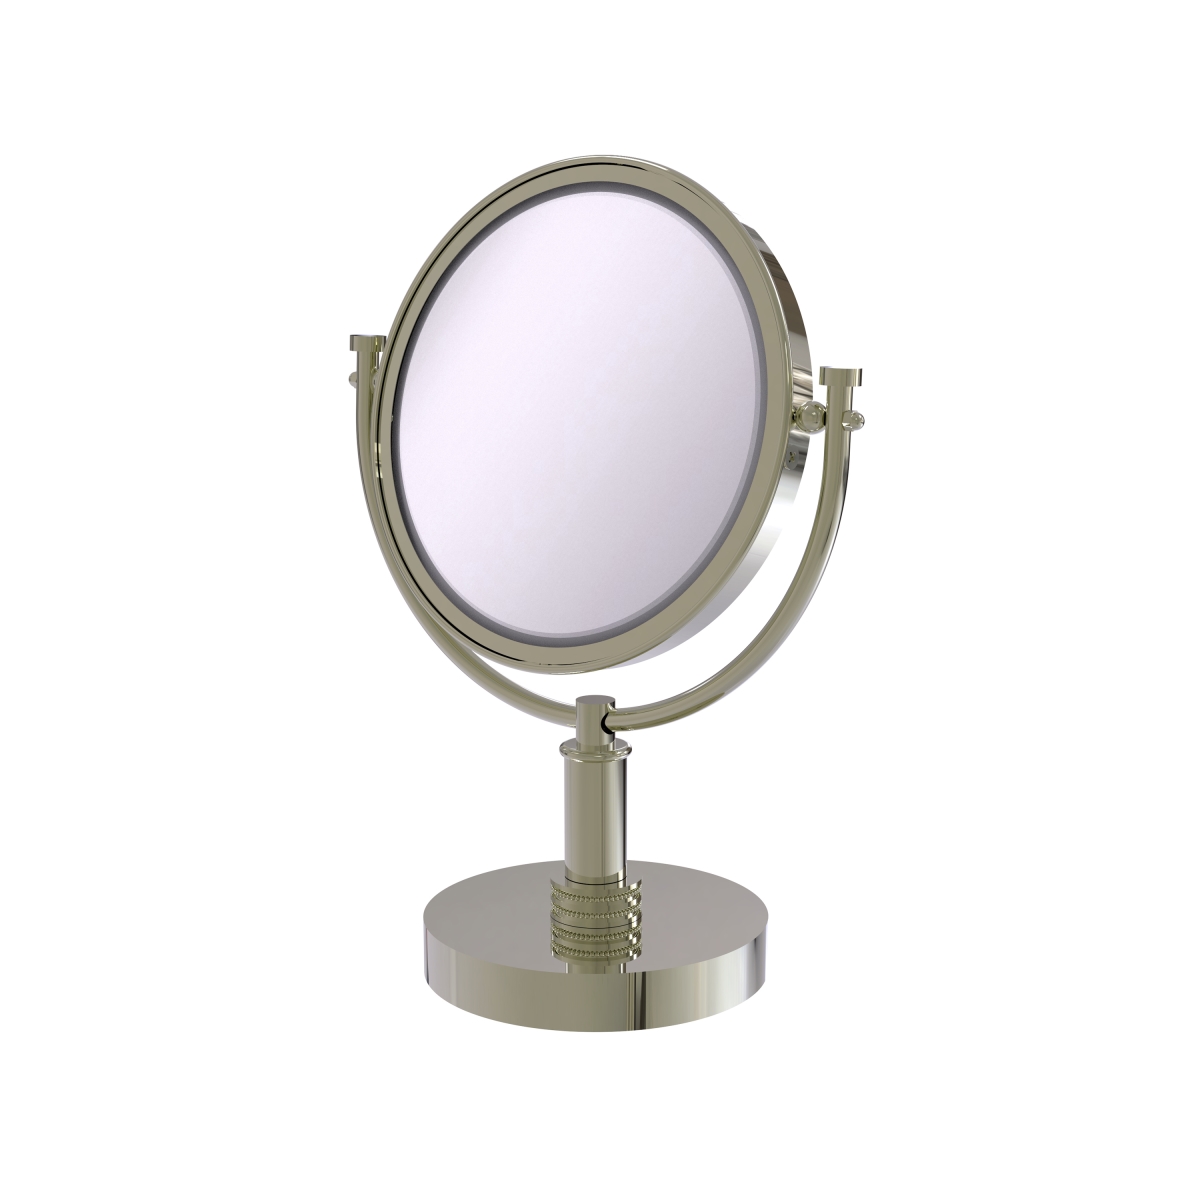 DM-4D-4X-PNI 8 in. Vanity Top Make-Up Mirror 4X Magnification, Polished Nickel - 15 x 8 x 8 in -  Allied Brass, DM-4D/4X-PNI